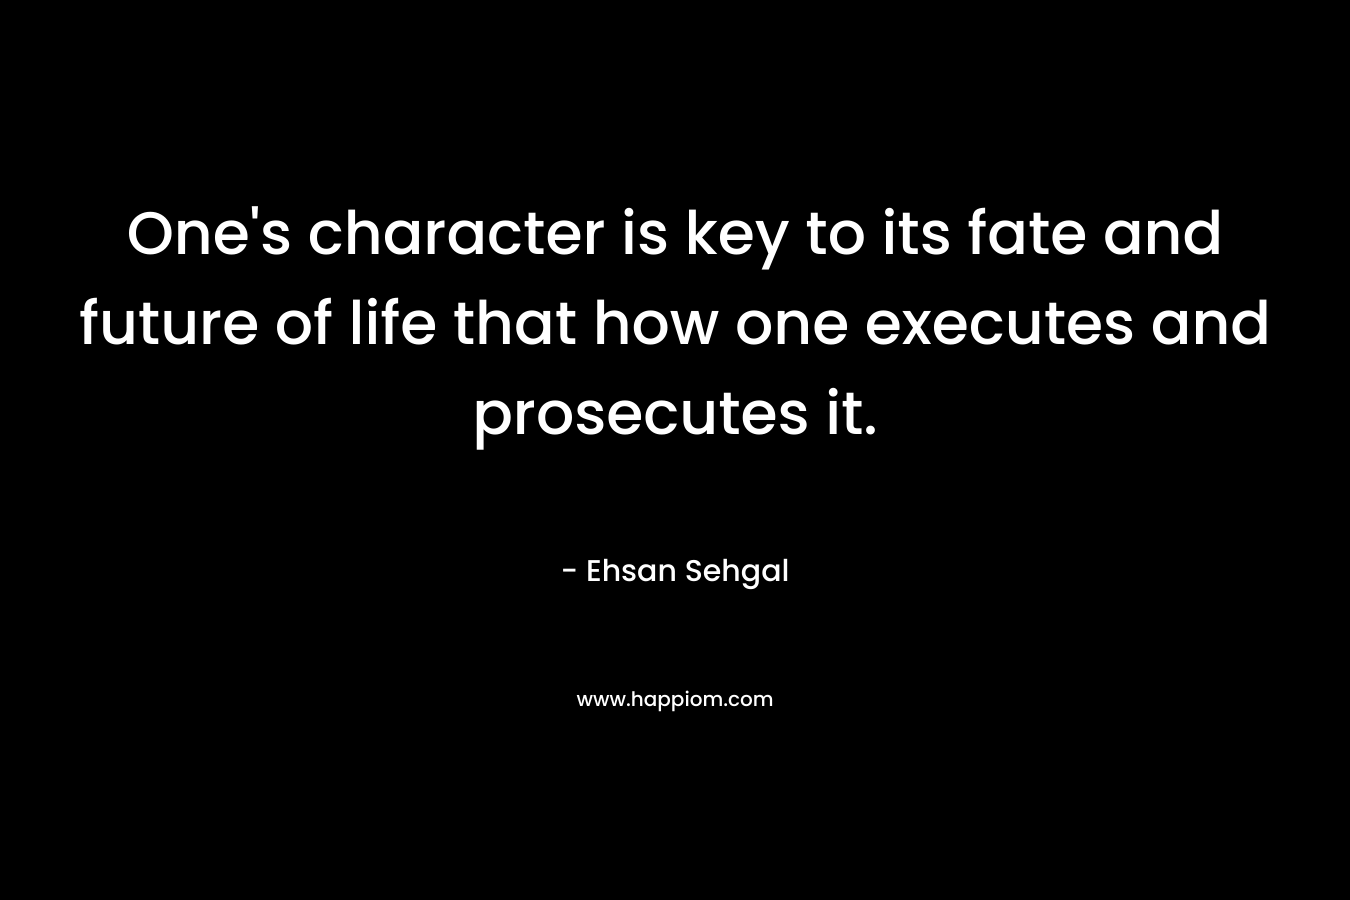 One's character is key to its fate and future of life that how one executes and prosecutes it.